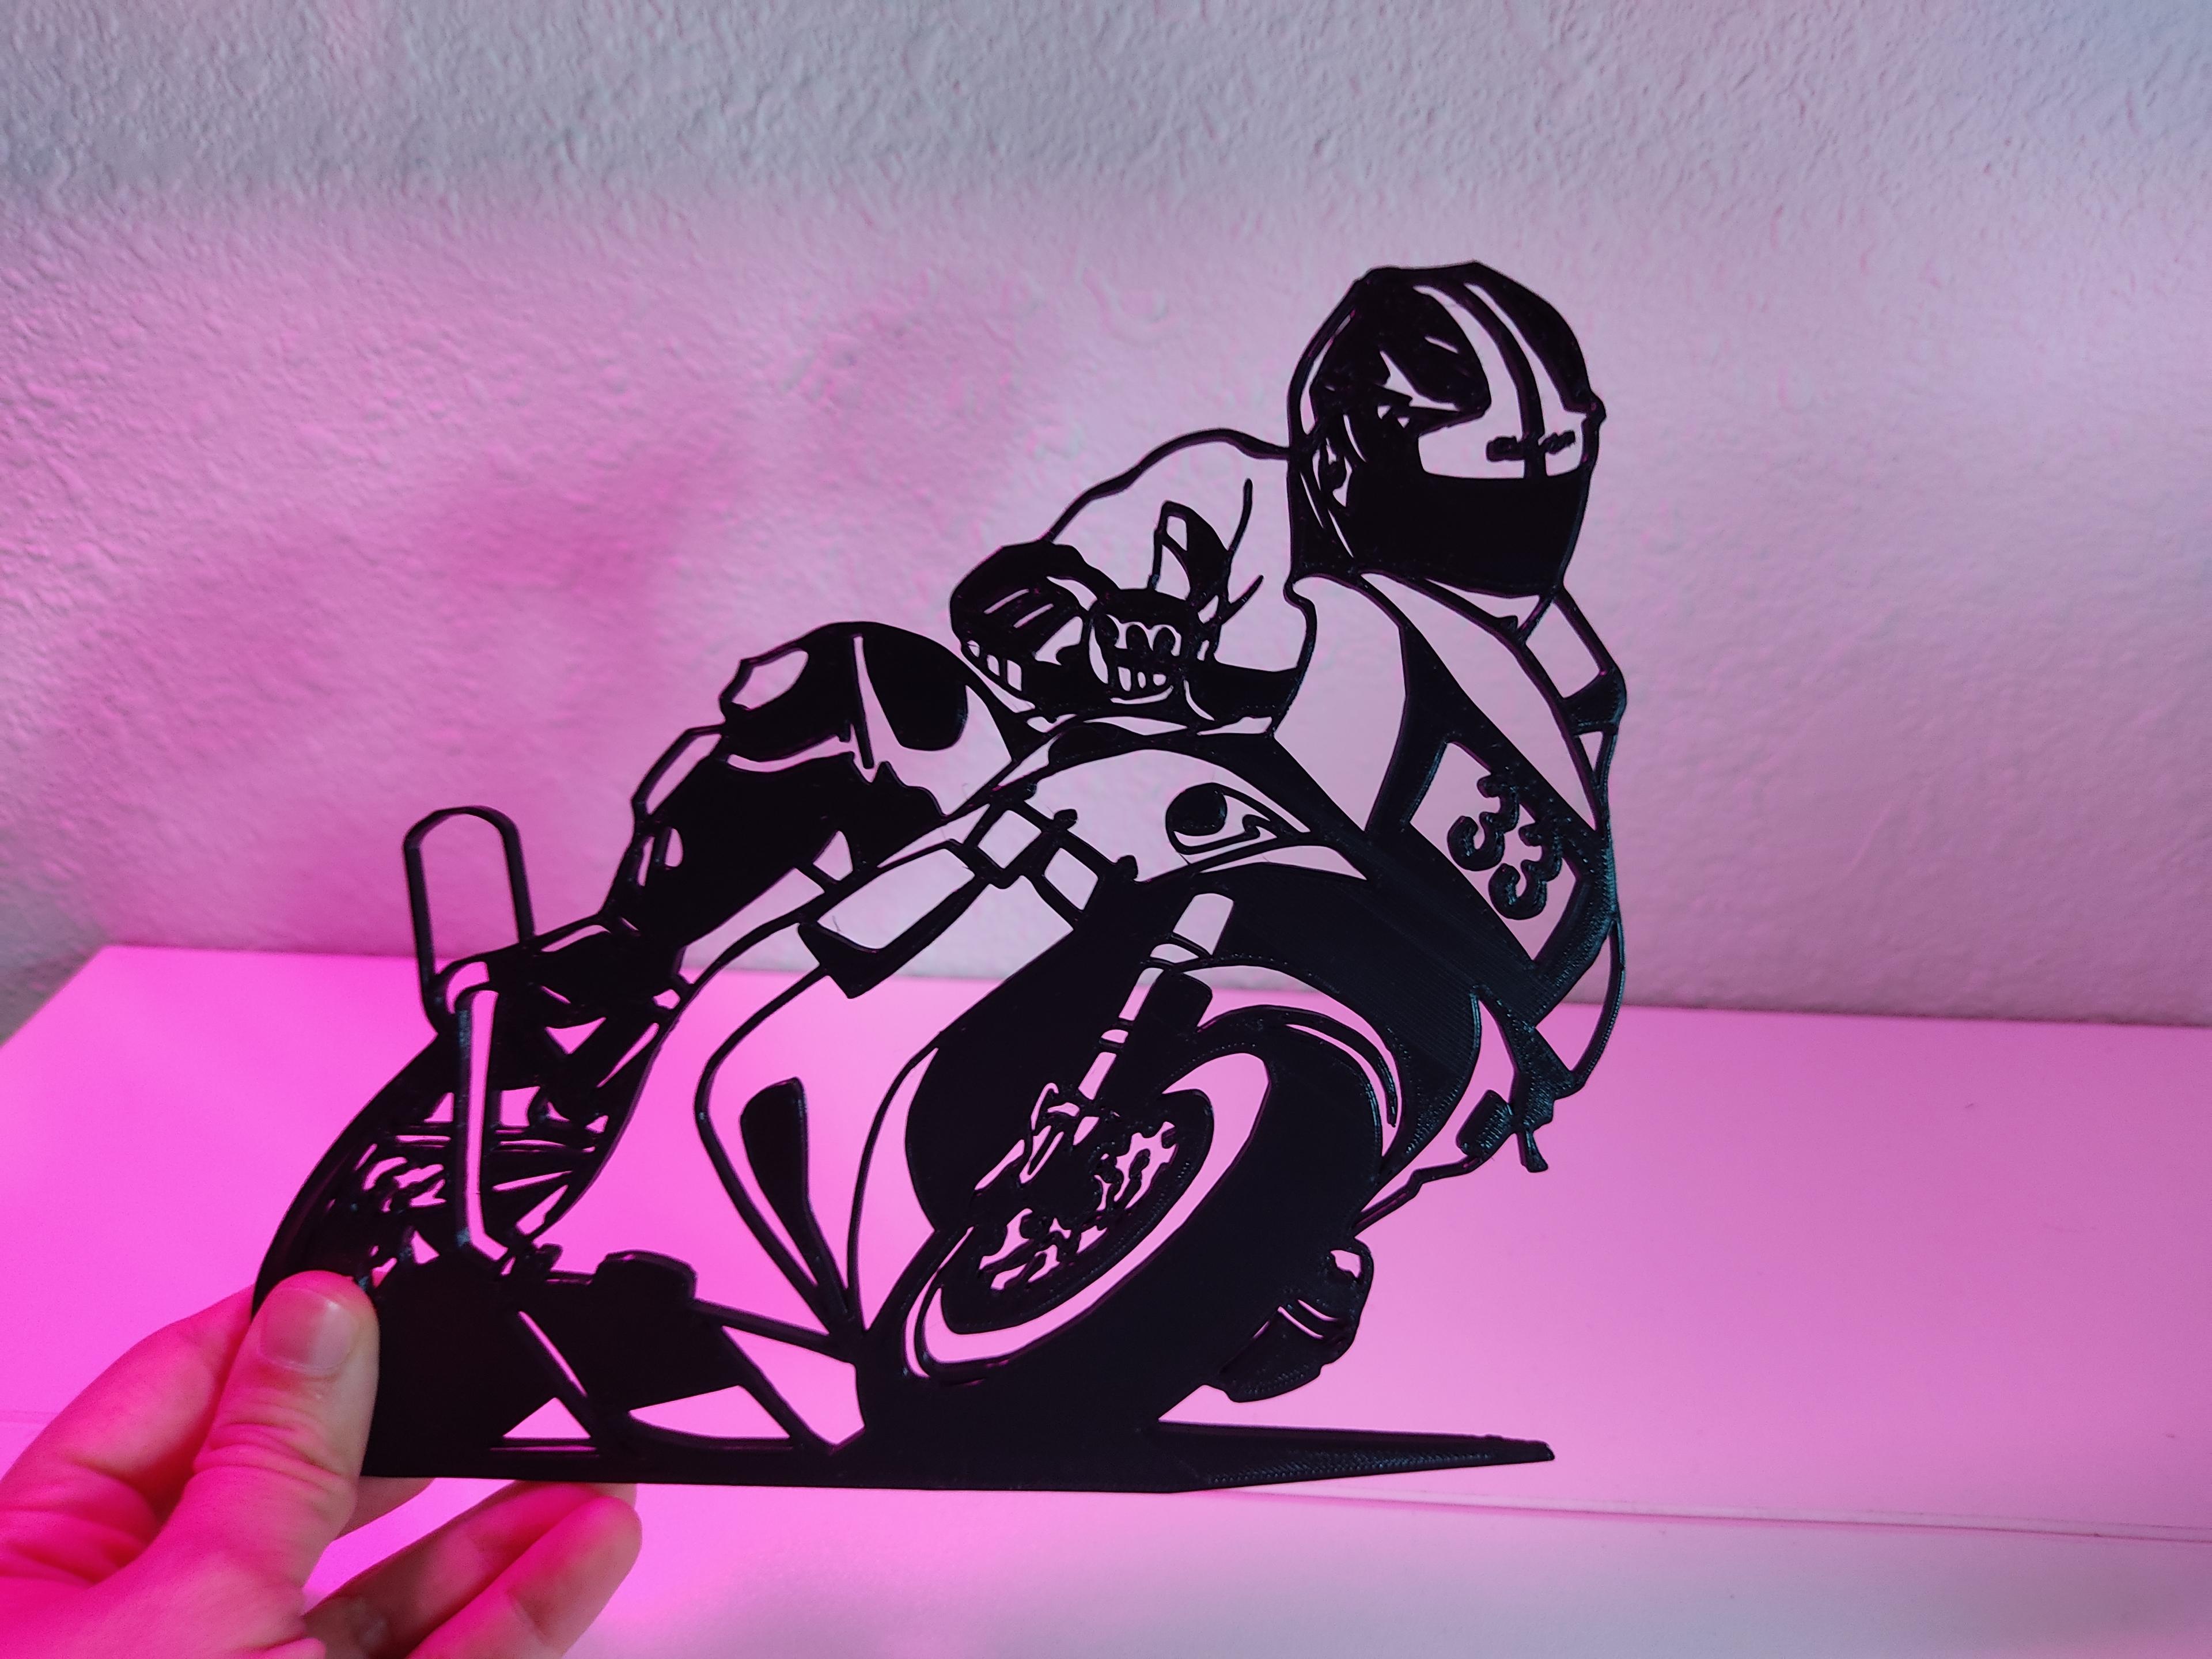 Silhouette of a Ducati and the rider created from a real photo. 3d model